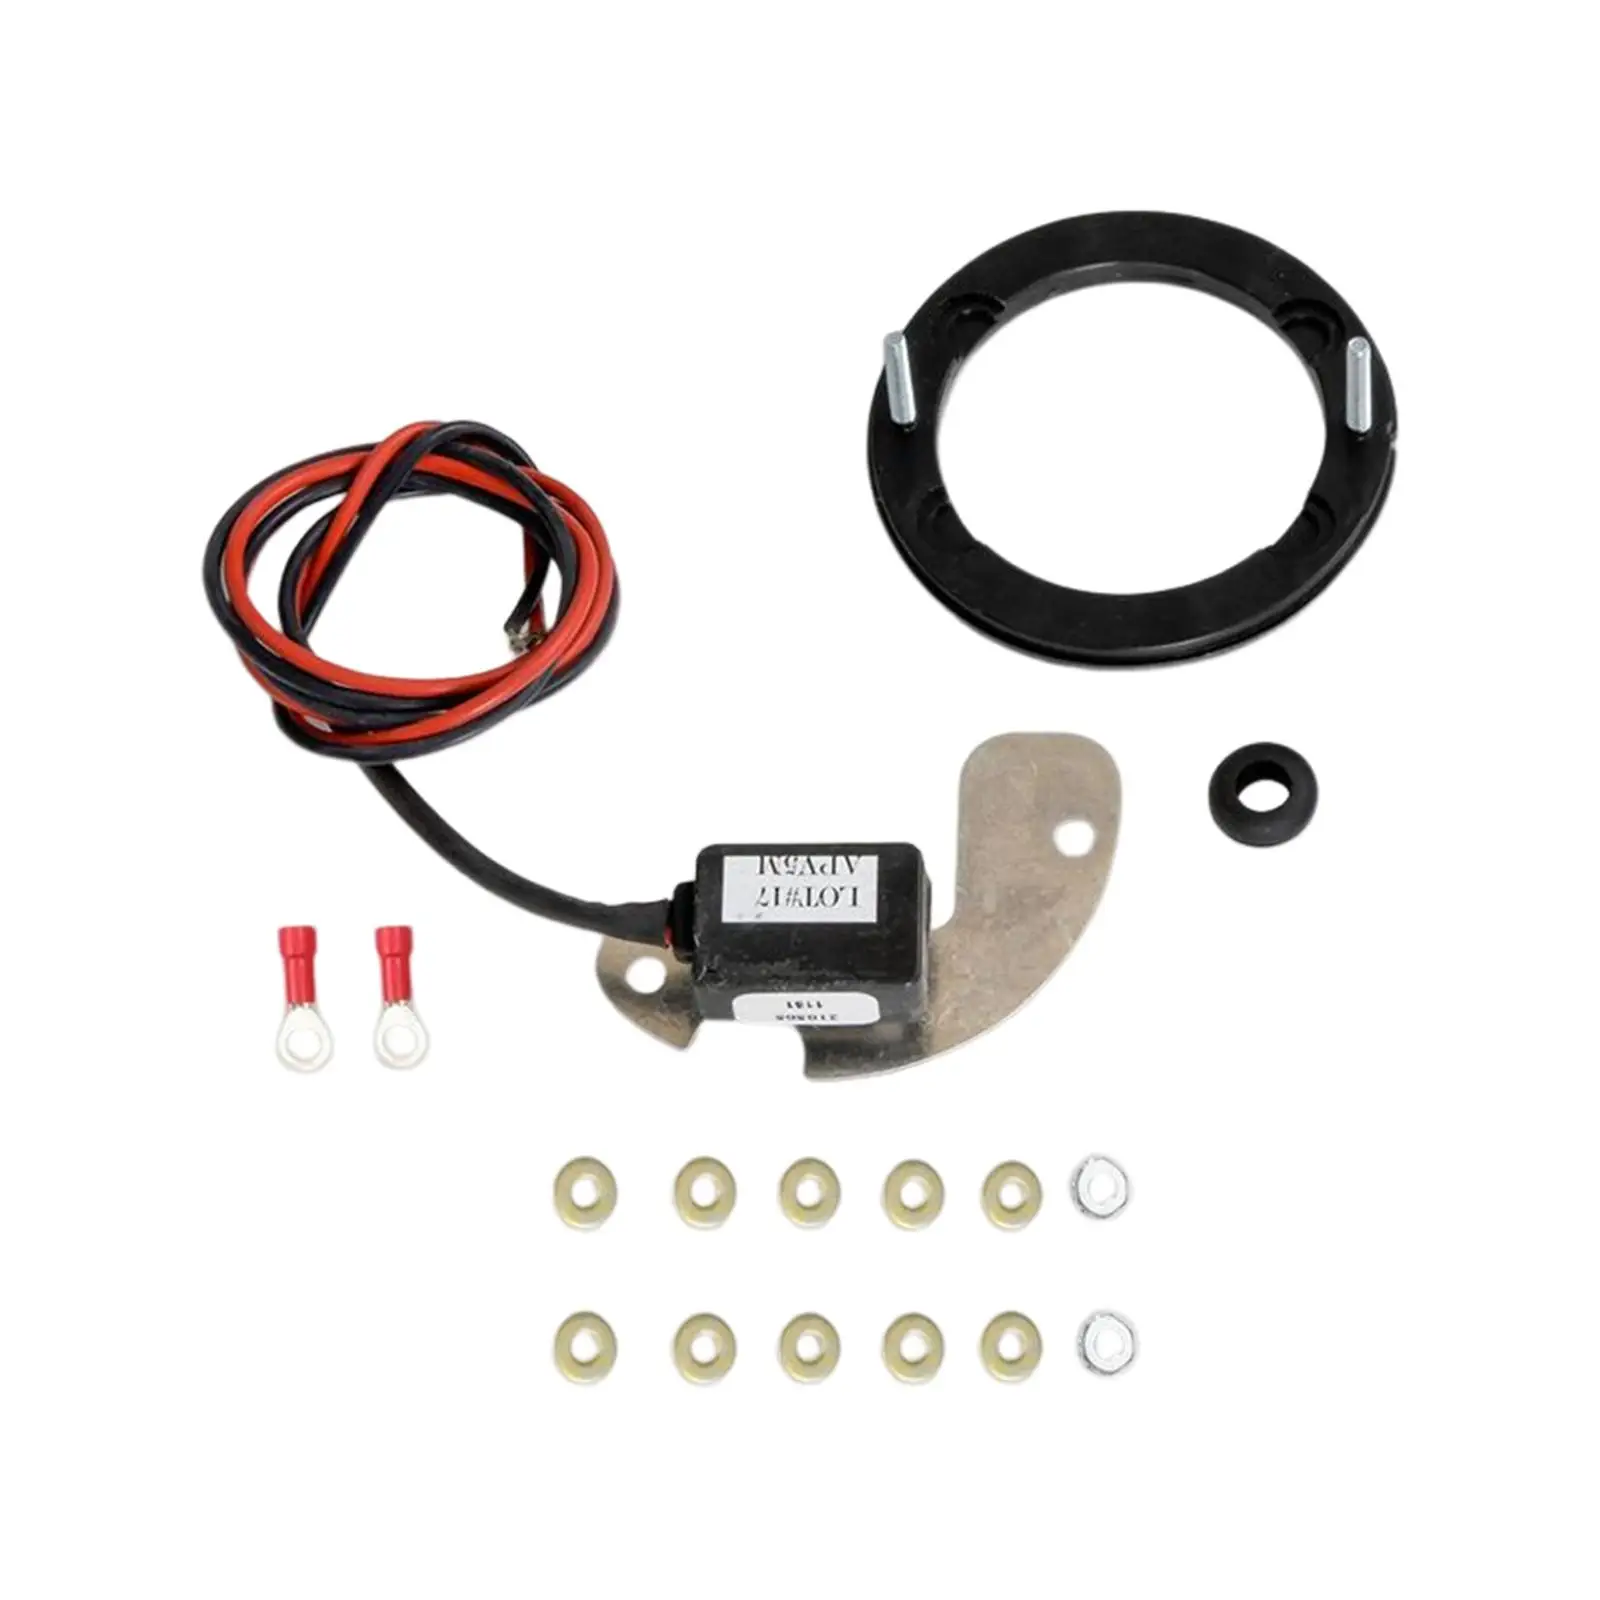 1181 Ignitor High Performance Sturdy Ignition Module Conversion Set for Delco 8 Cylinder 1956-1974 Repair Refitting Upgrade